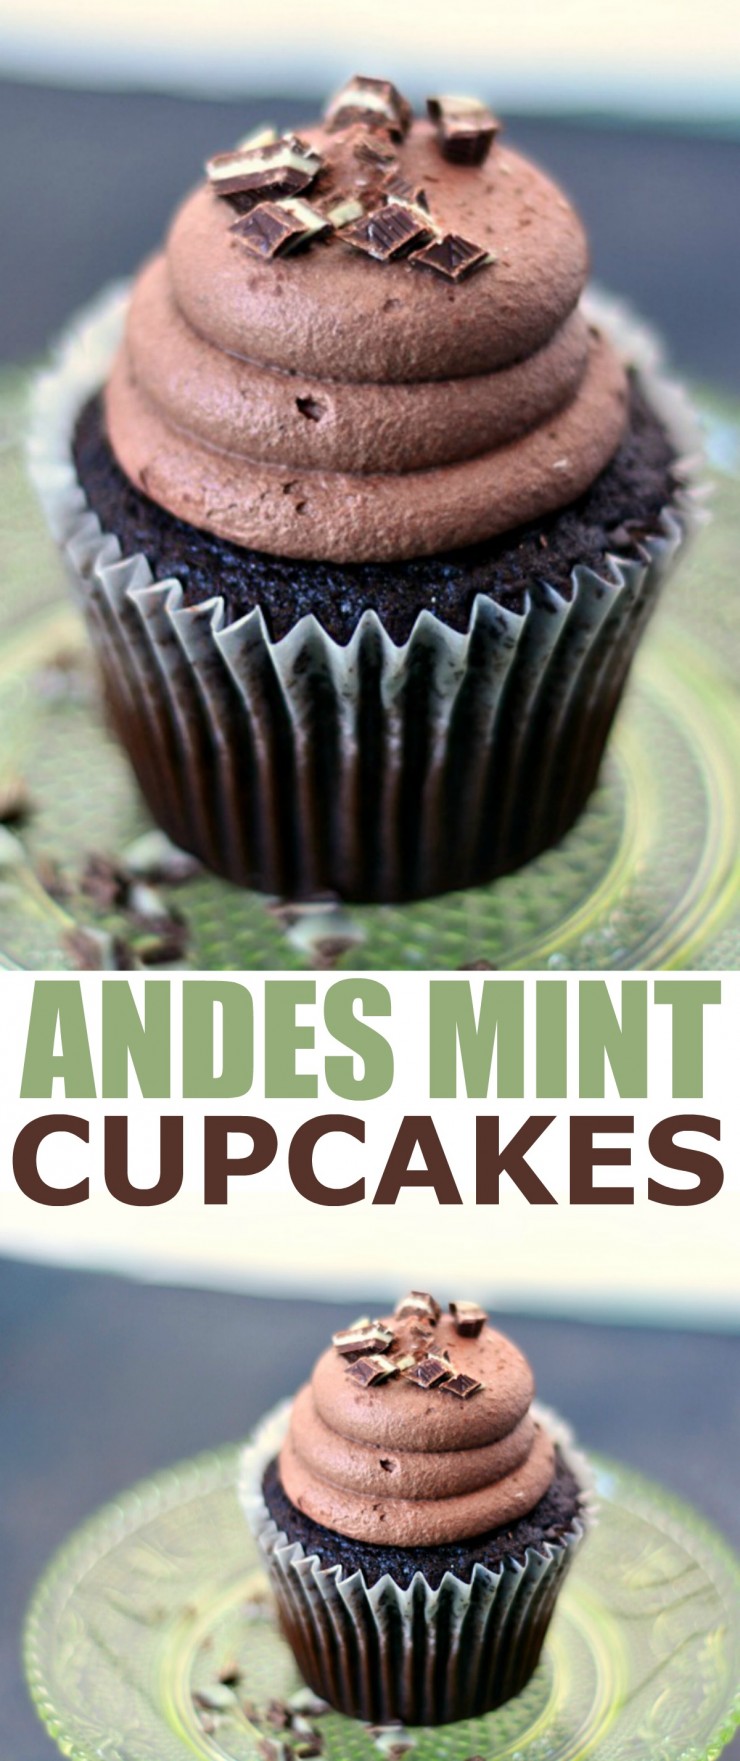 These Andes Mint Cupcakes are perfect for celebrating St. Patrick's Day with! You will love the chocolate mint cupcakes full of so much flavor paired with a light and fluffy chocolate frosting.